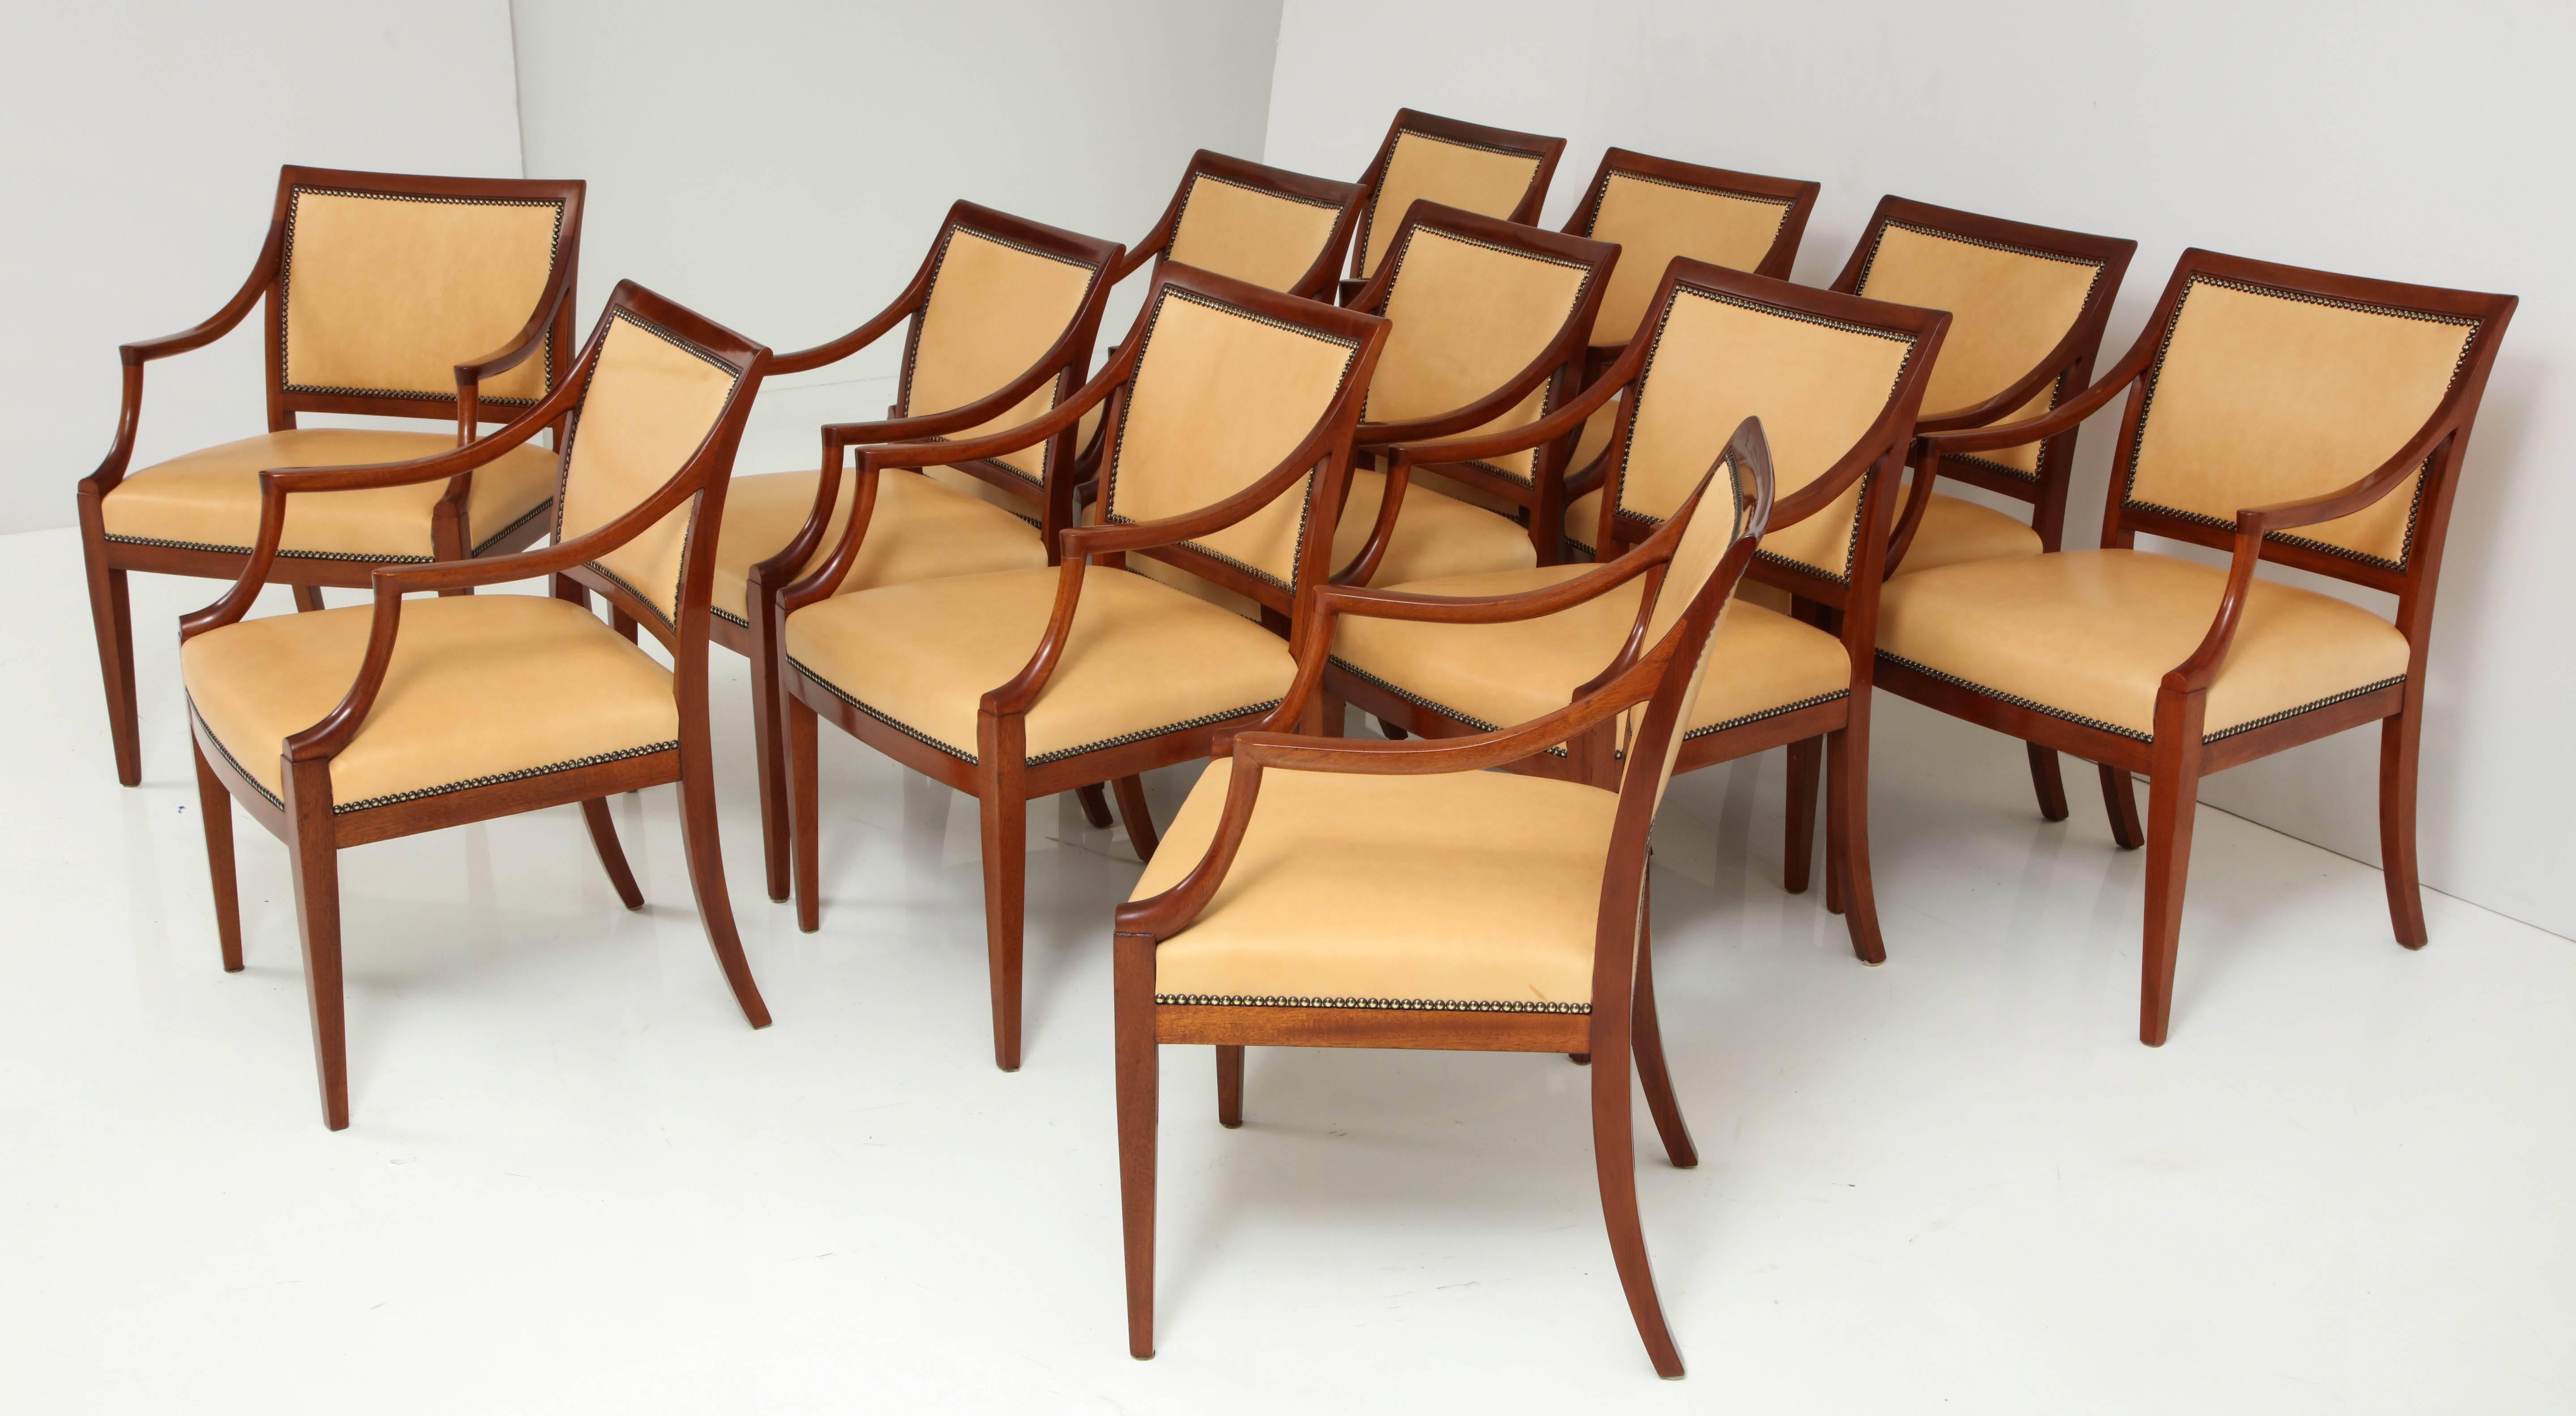 A set of 12 Frits Henningsen mahogany open armchairs with leather seat and back finished with French nailheads, circa 1940s, a rich mahogany frame with downswept armrests raised on square tapered legs. New leather upholstery. 

Price is per